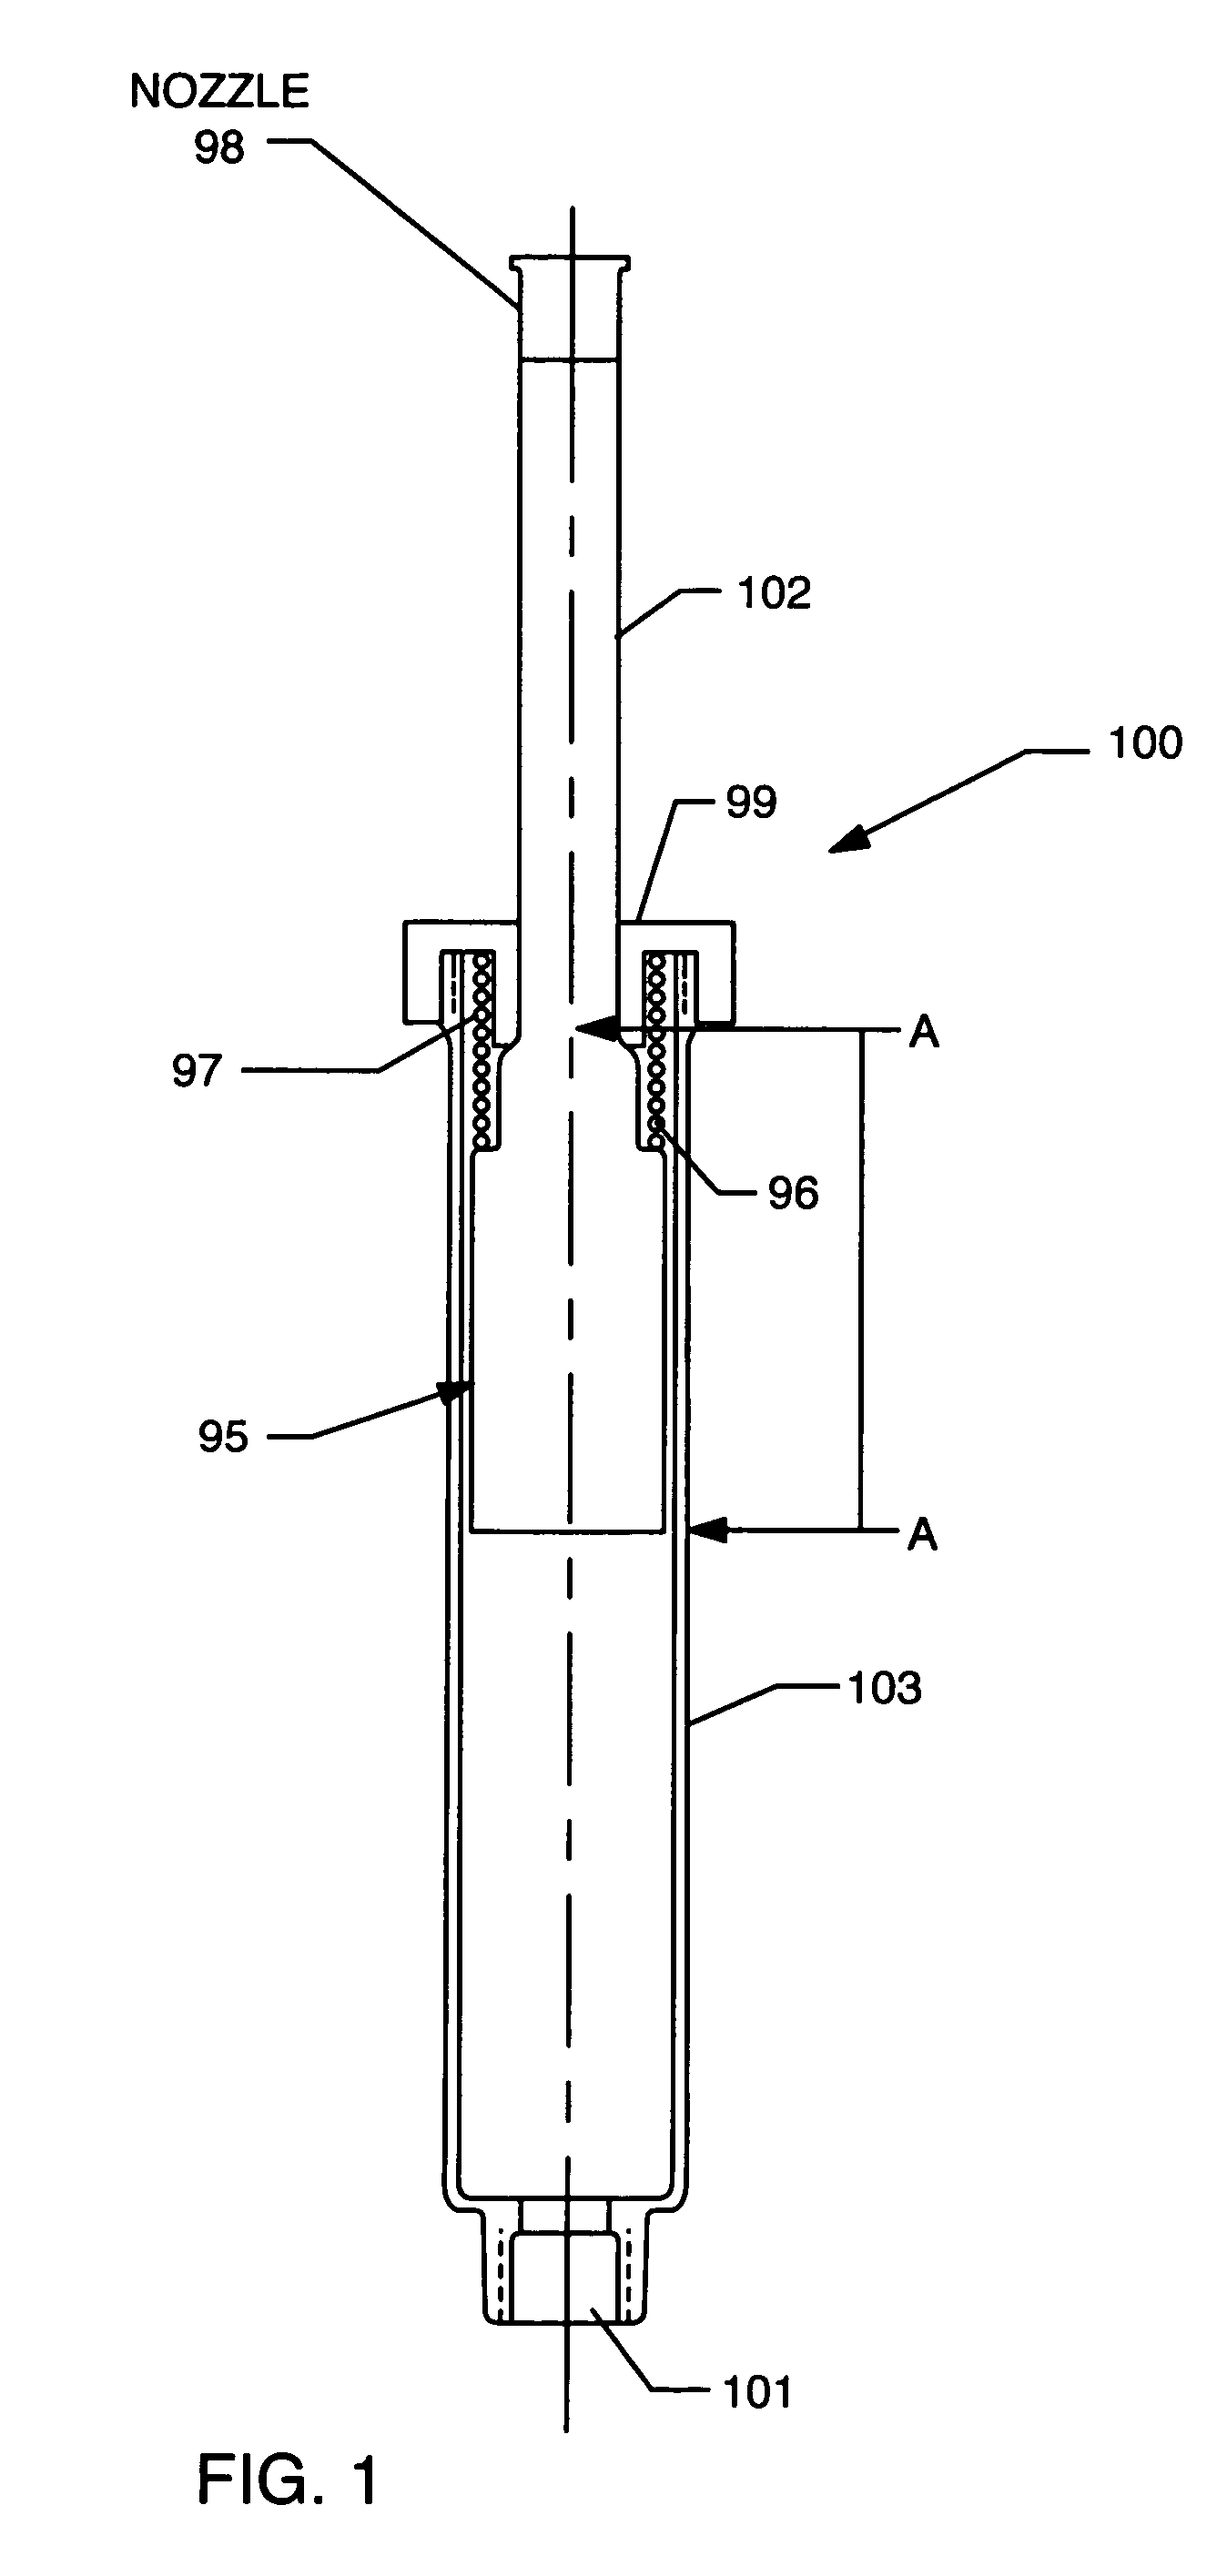 Method and apparatus for reducing the precipitation rate of an irrigation sprinkler